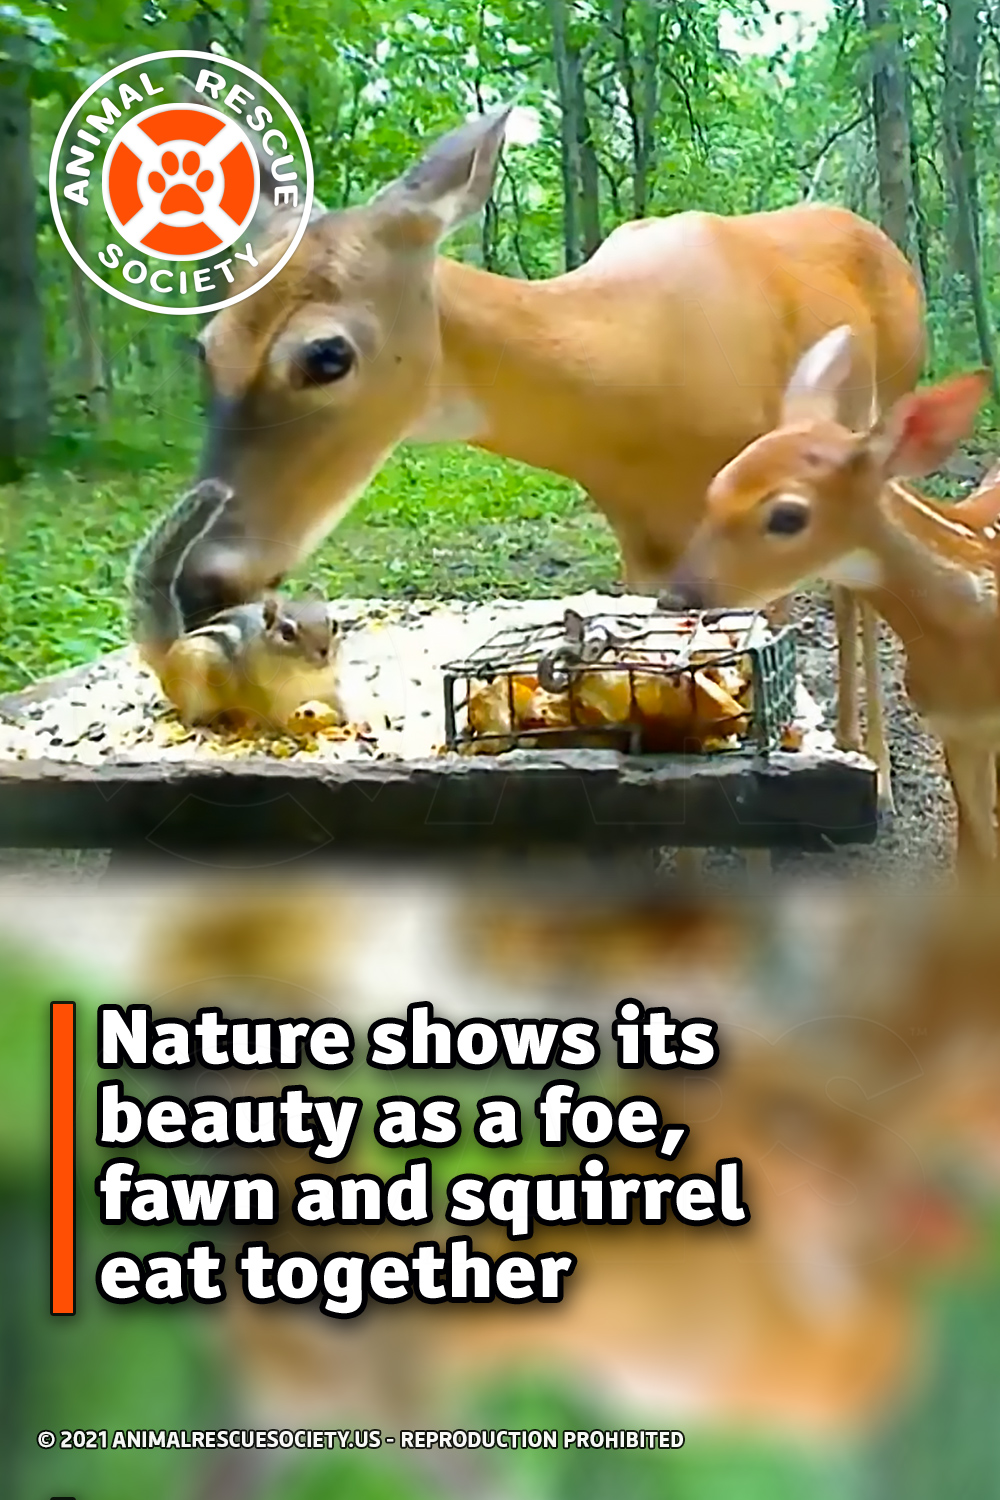 Nature shows its beauty as a foe, fawn and chipmunk eat together